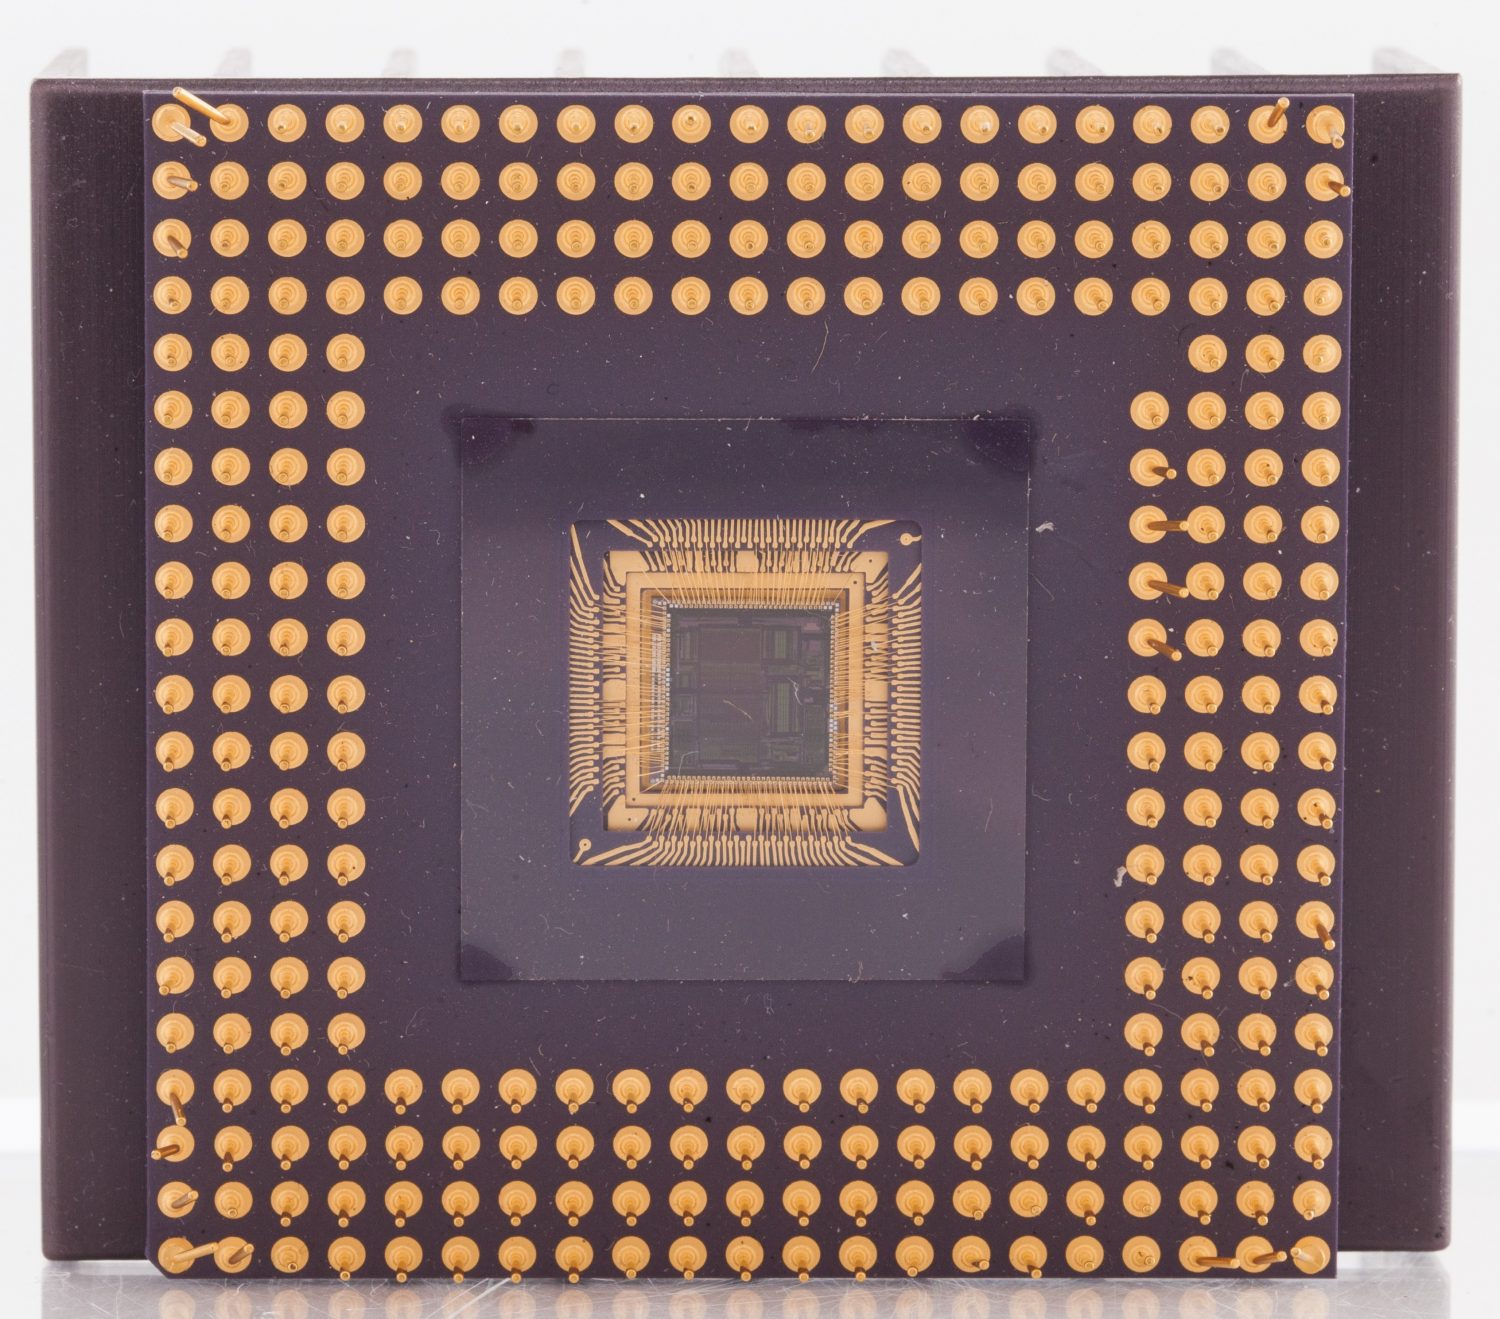 Close-up view of a chip package featuring Hewlett-Packard's reduced instruction set computing (RISC) architecture.